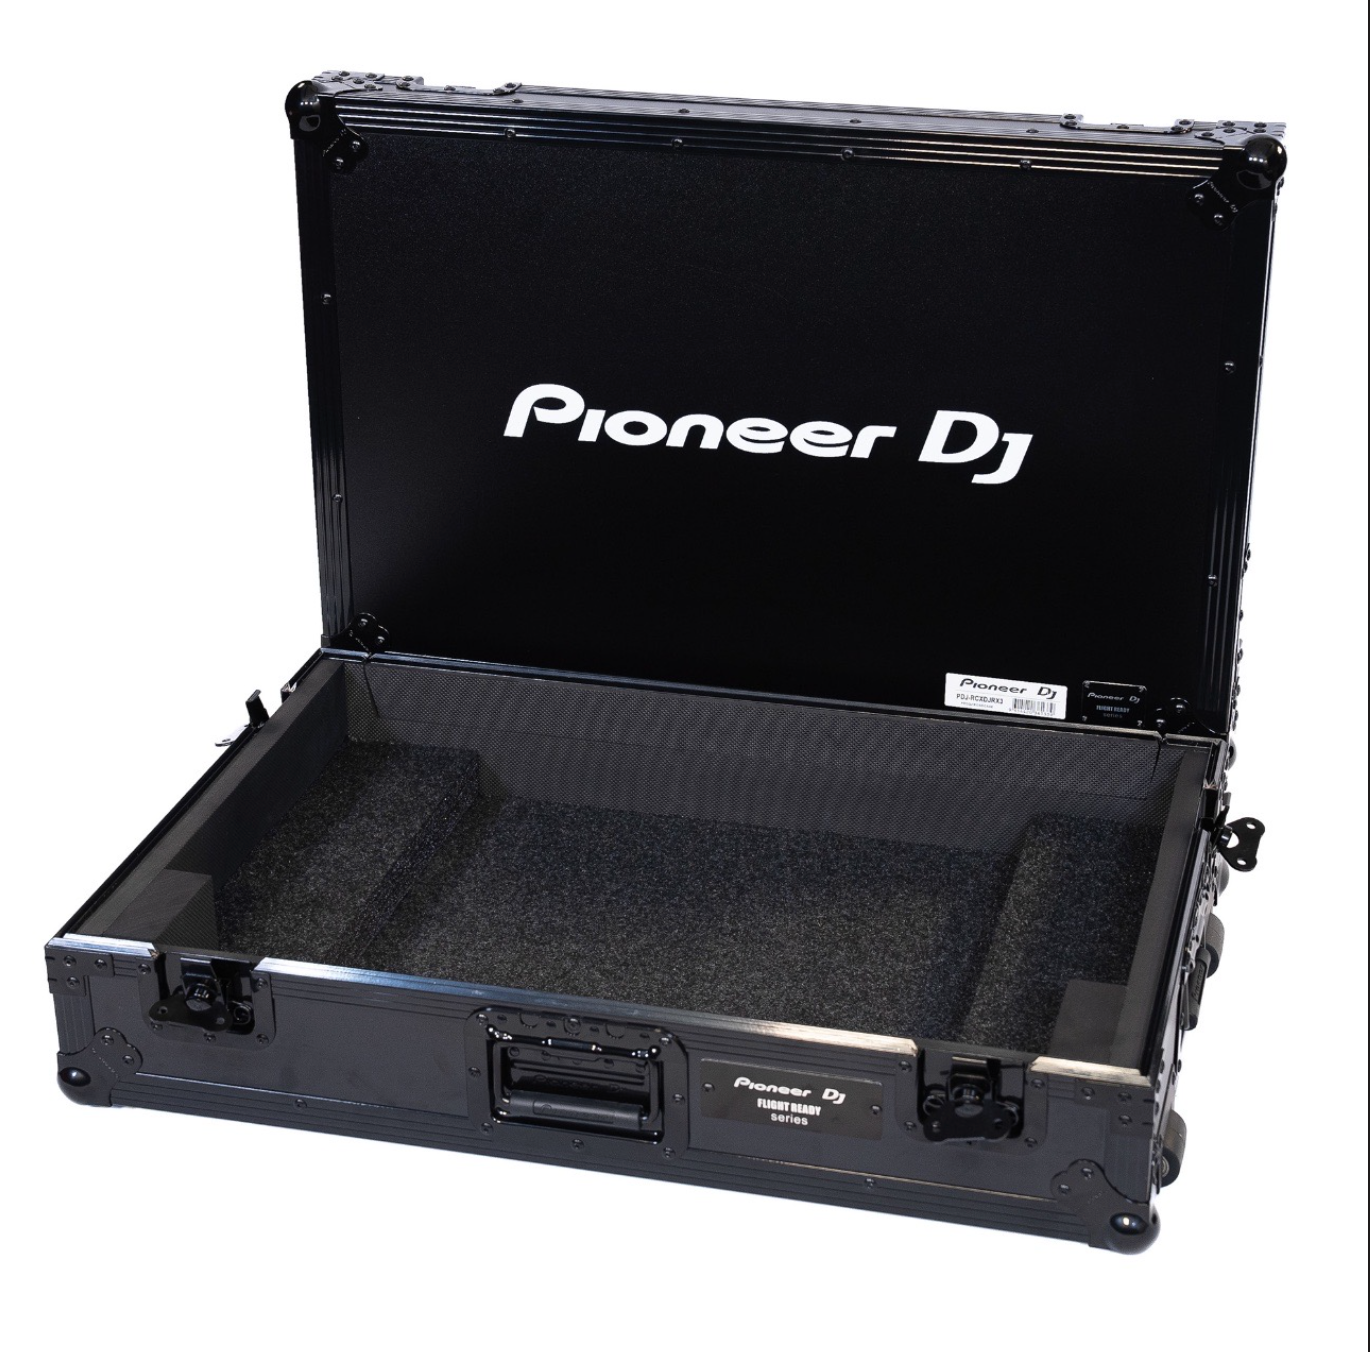 Pioneer DJ Roadcase Black for XDJ-RX3 Controller without Laptop Holder